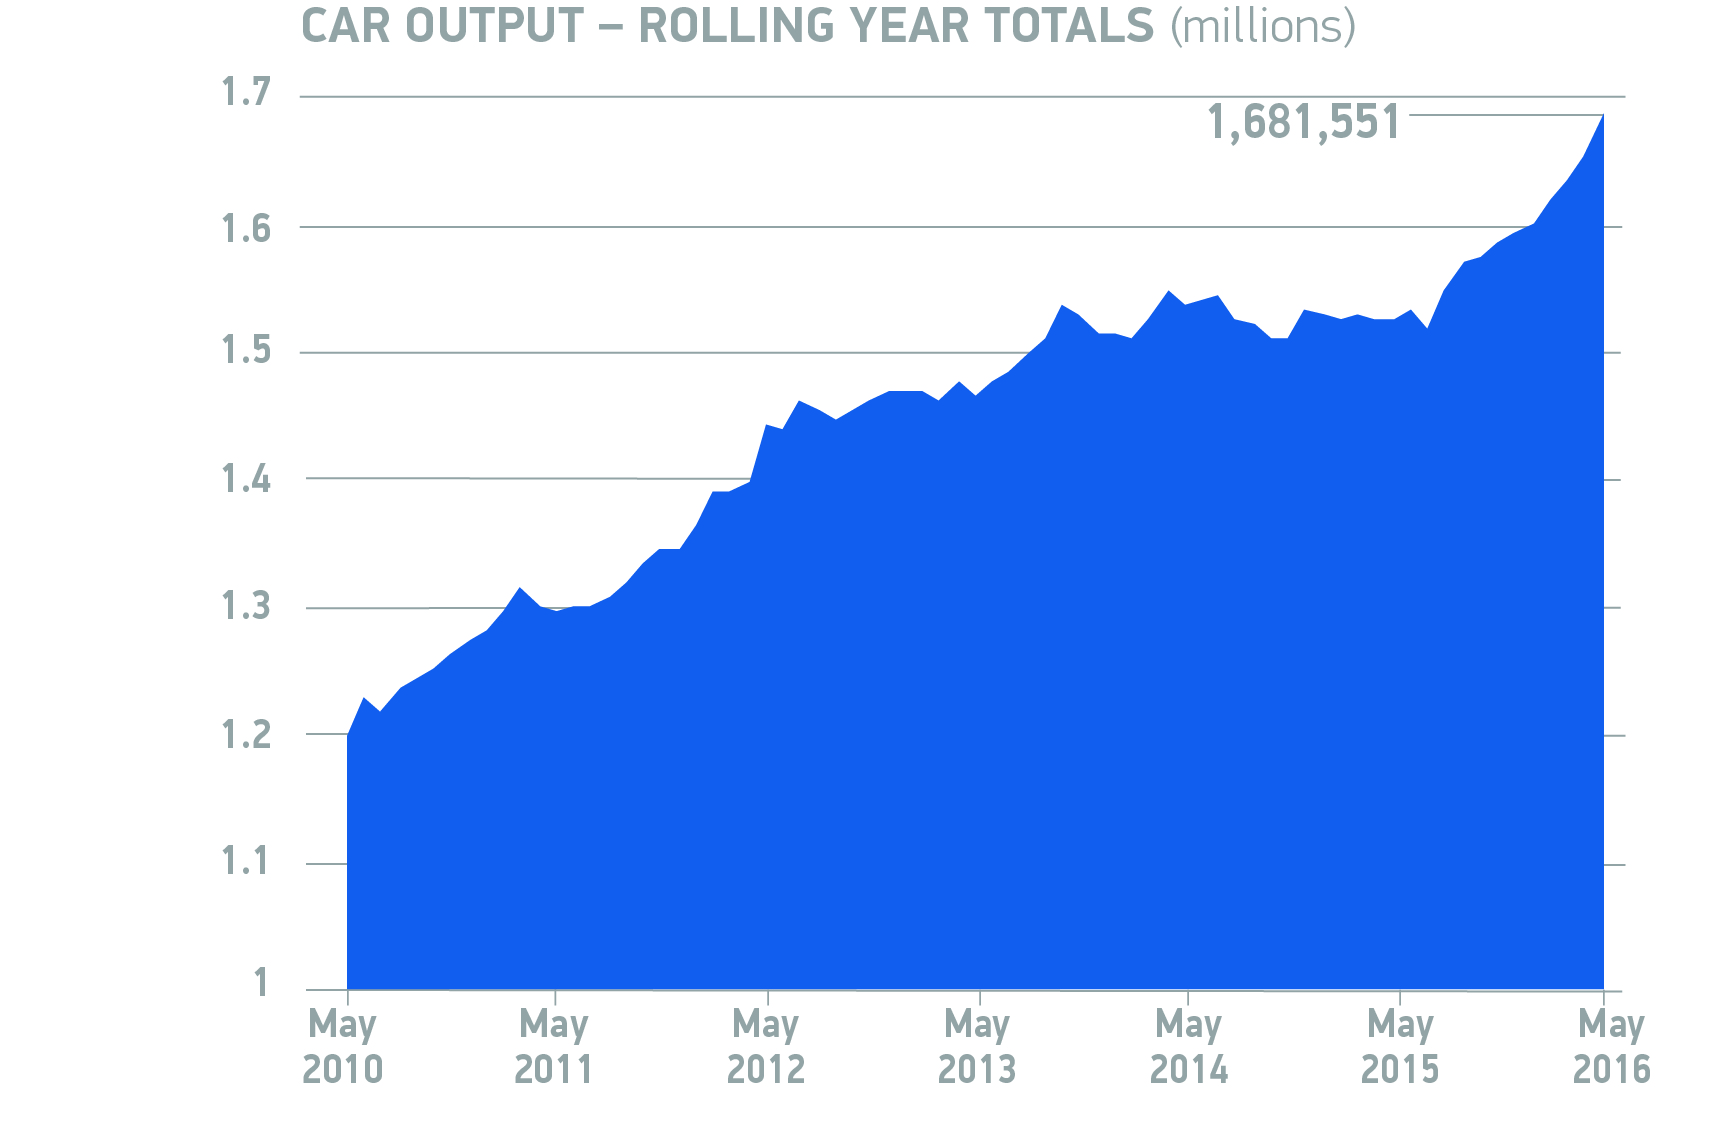 Car output_rolling year totals May 2016